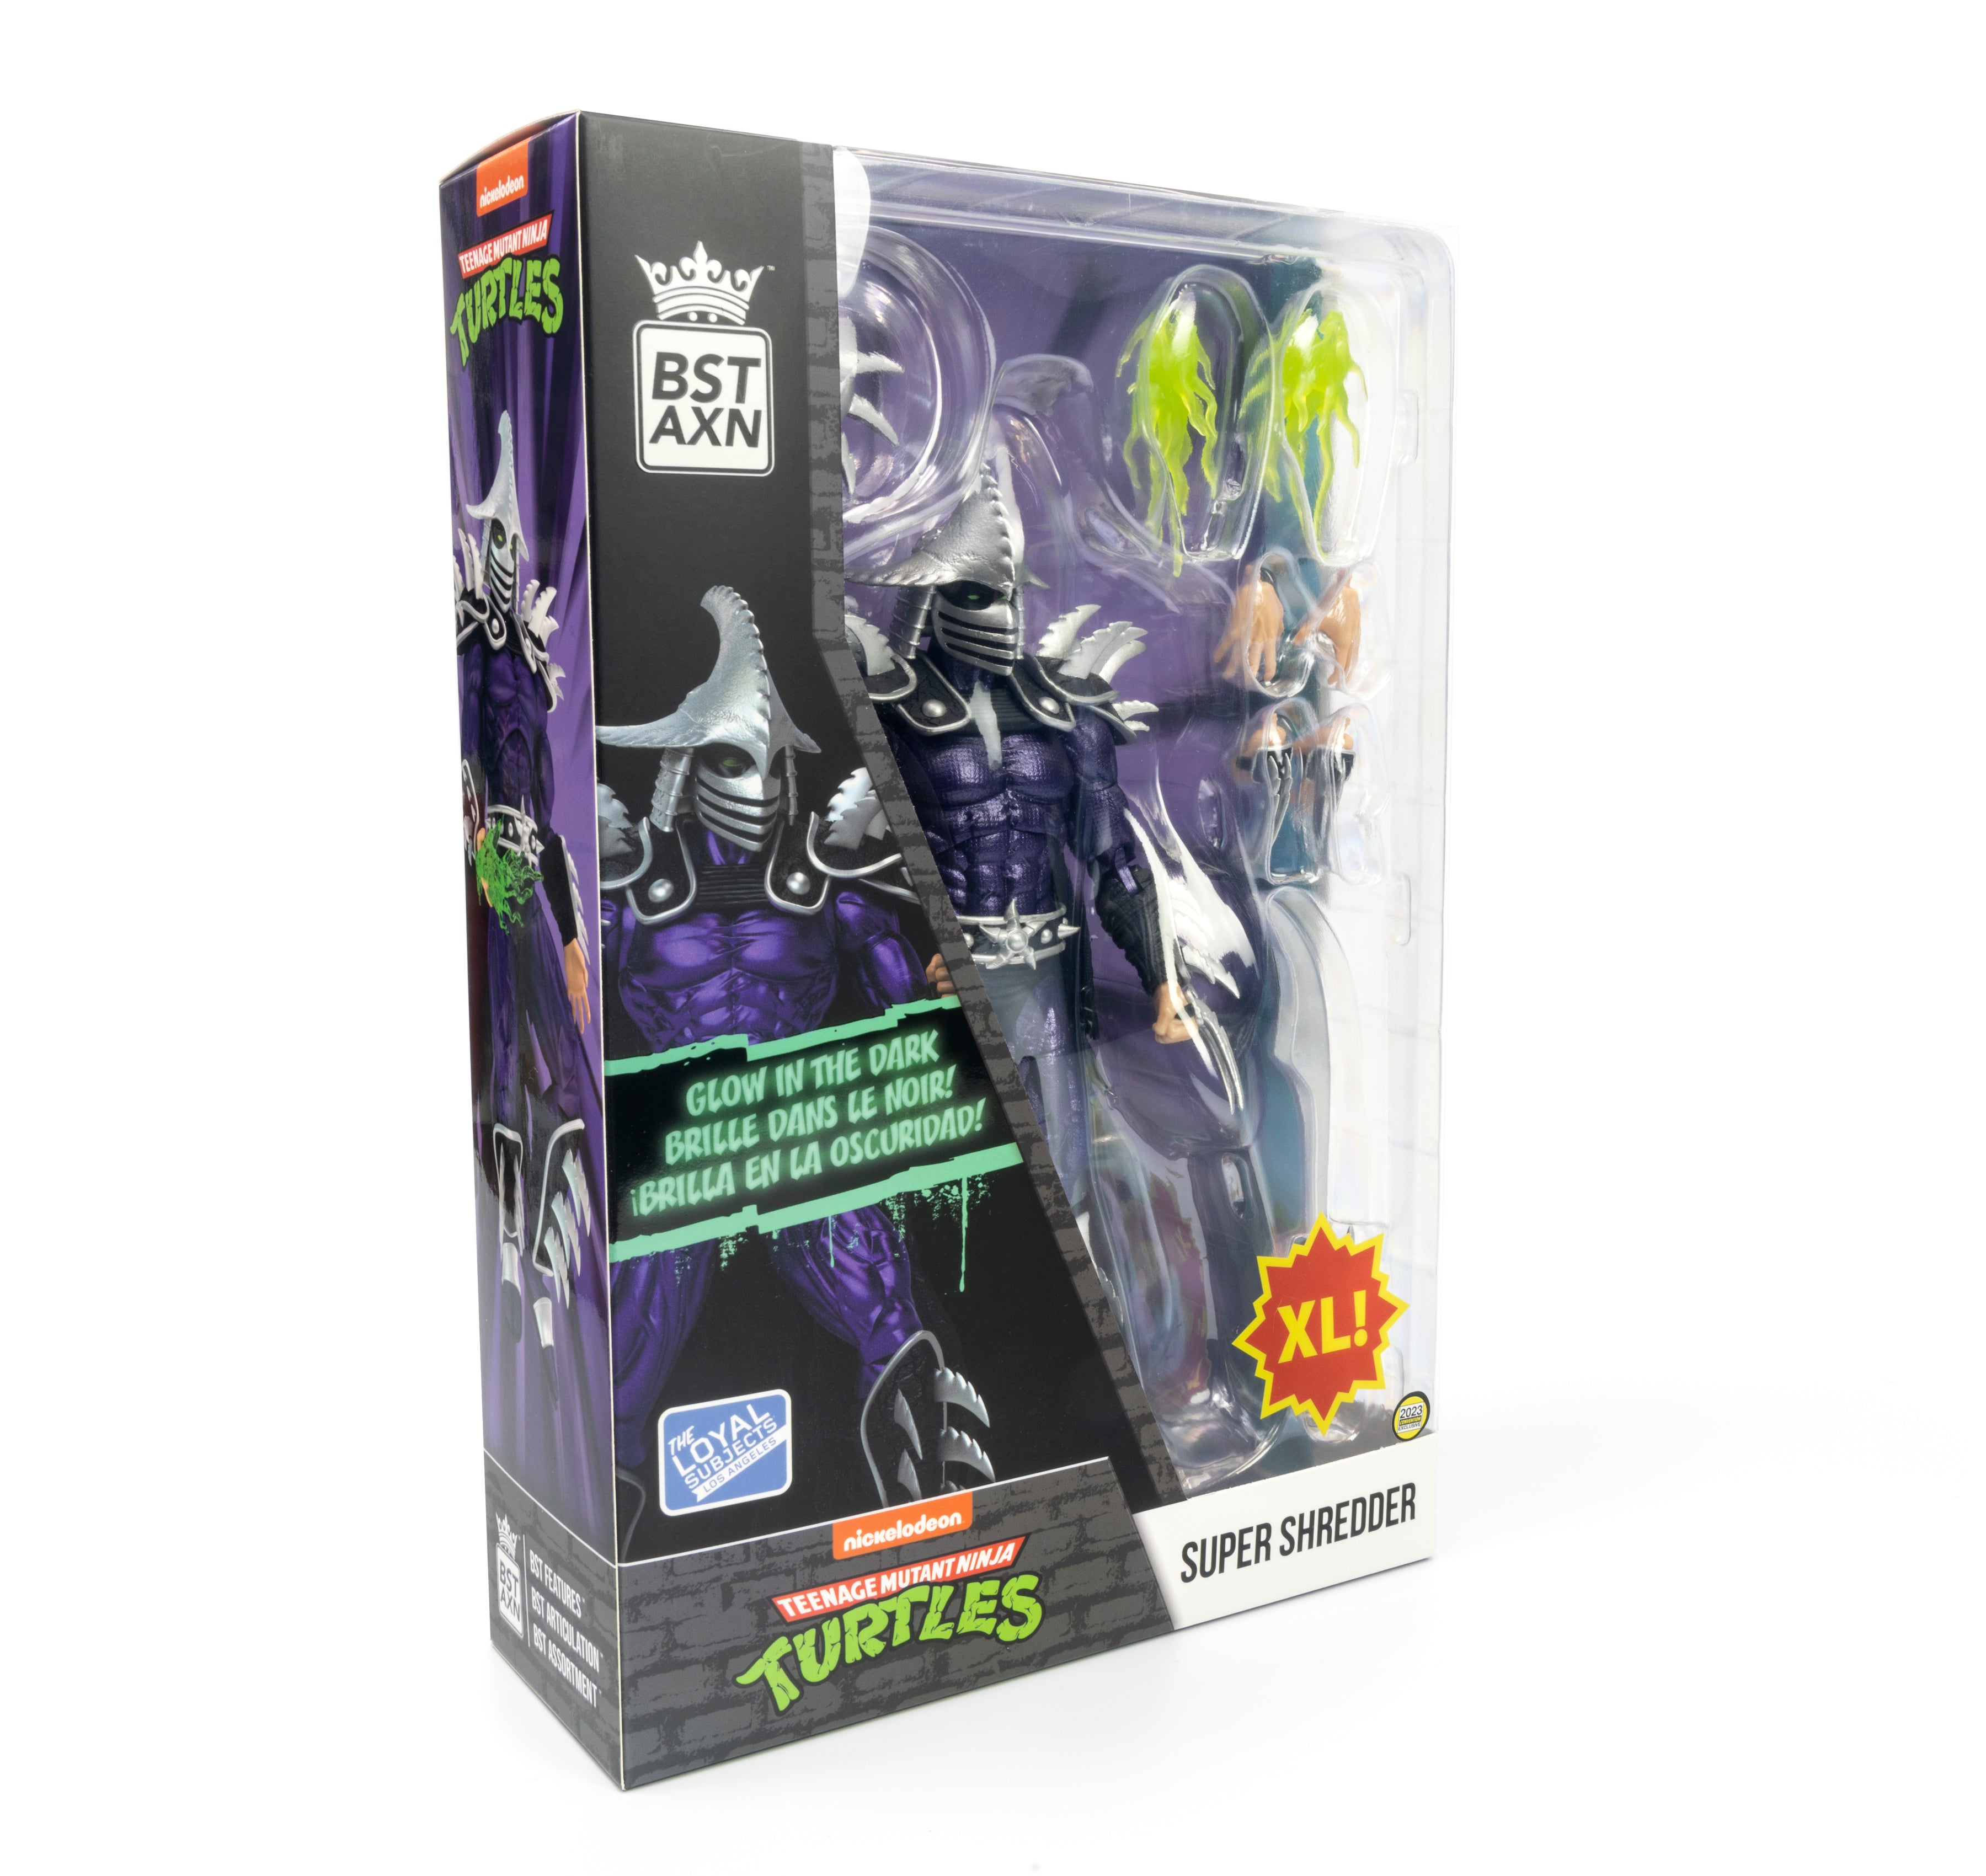 Super7 on X: Look out, Ninja Turtles fans! Shredder is here to help you  cut carbs, whether you like it or not! This #SDCC edition Teenage Mutant Ninja  Turtles Shredder ReAction Figure